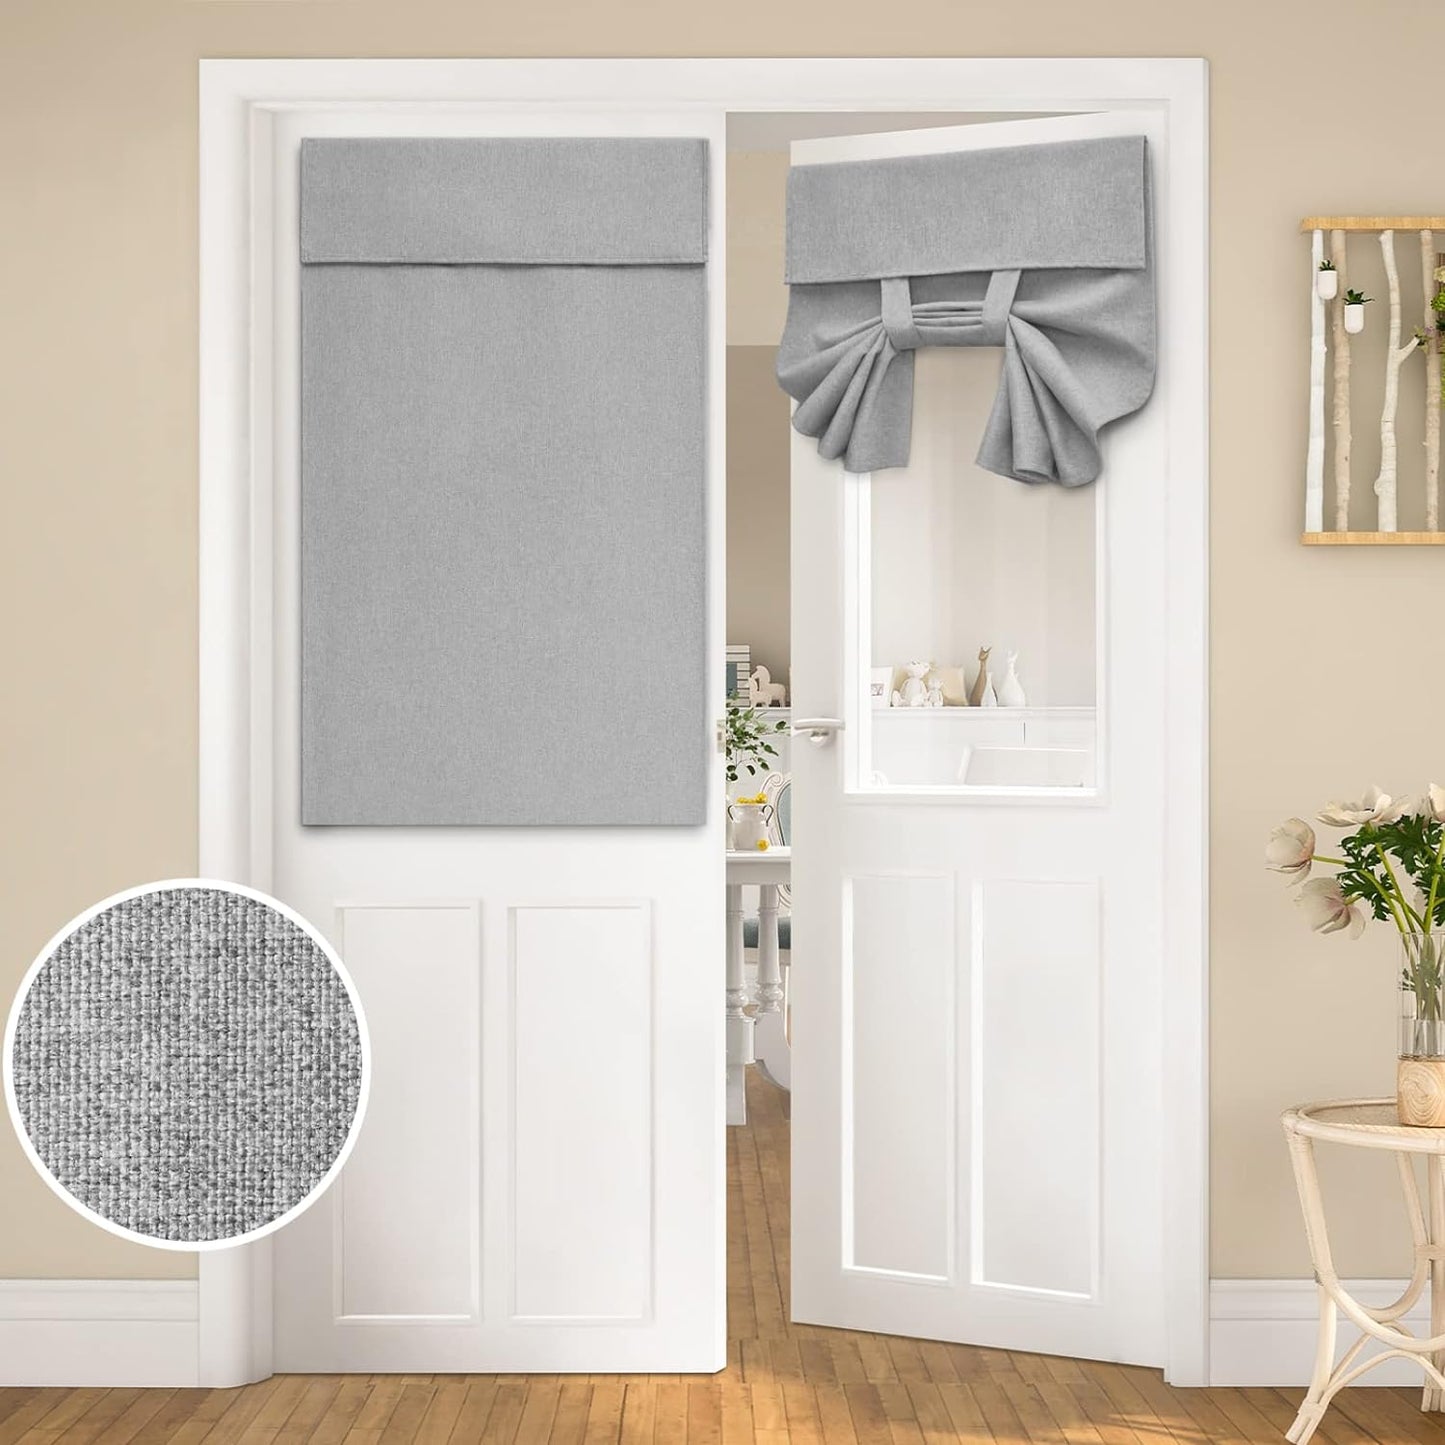 HOMEIDEAS Natural Linen French Door Curtains, Privacy Door Window Curtains Panel, French Door Shade for Door Window, Thermal Insulated Door Window Covering for Bedroom, W26 X L40 Inch, 1 Panel  HOMEIDEAS Light Grey 1 Panel-W26" X L40" 